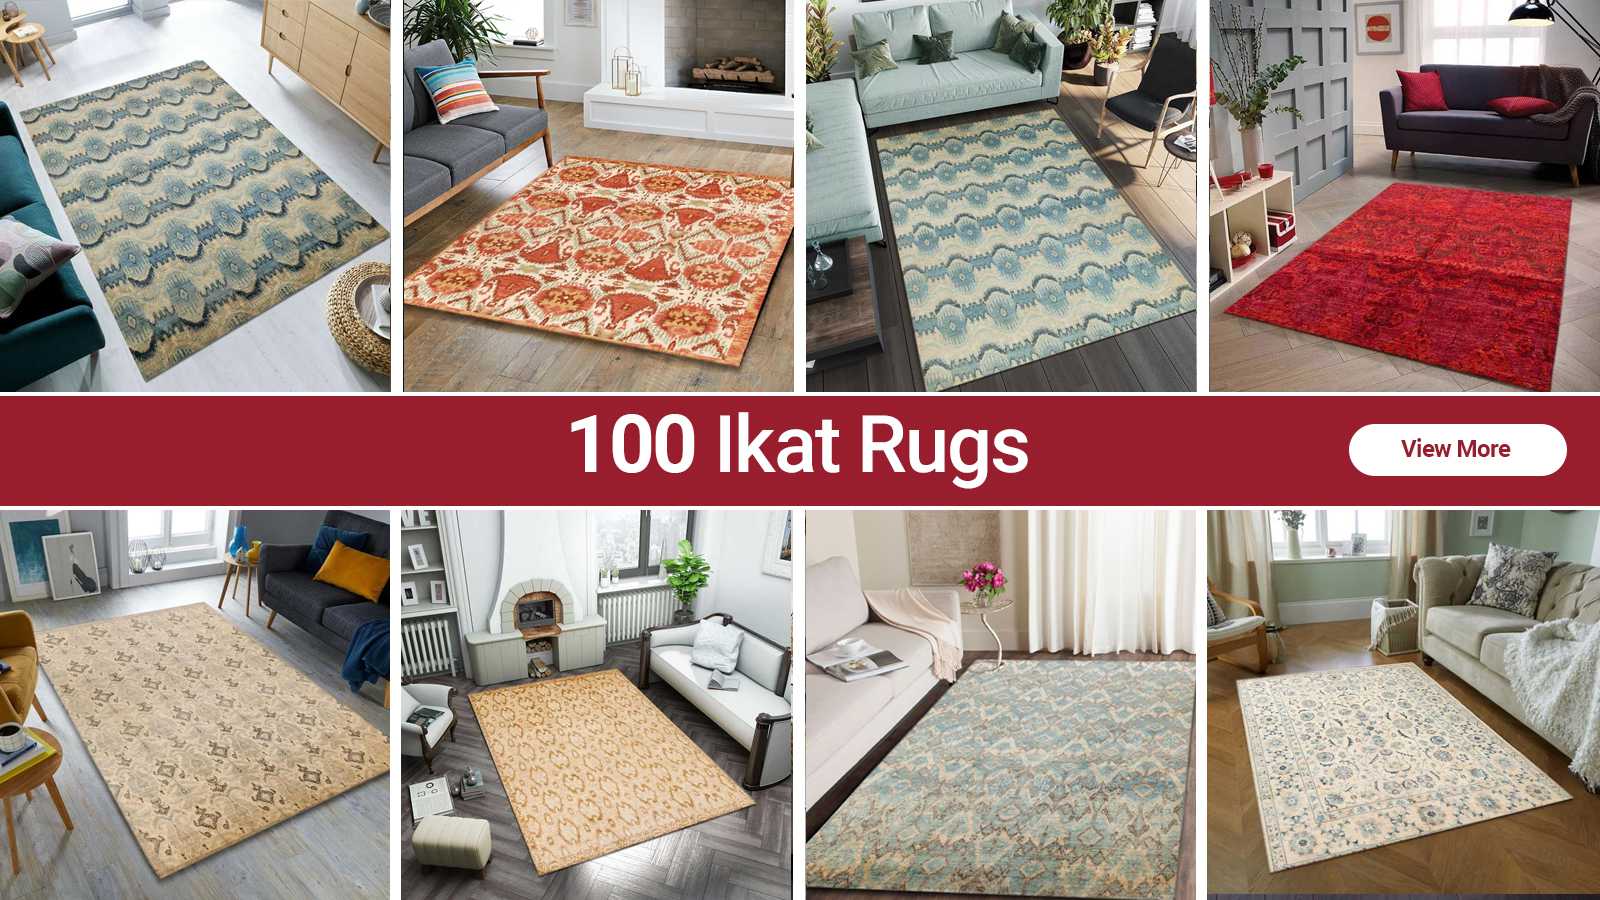  Do-it-Yourself Carpet and Area Rug Binding (22 Colors  Available) - Quantity 1 = 5 Foot Section, Beige : Everything Else